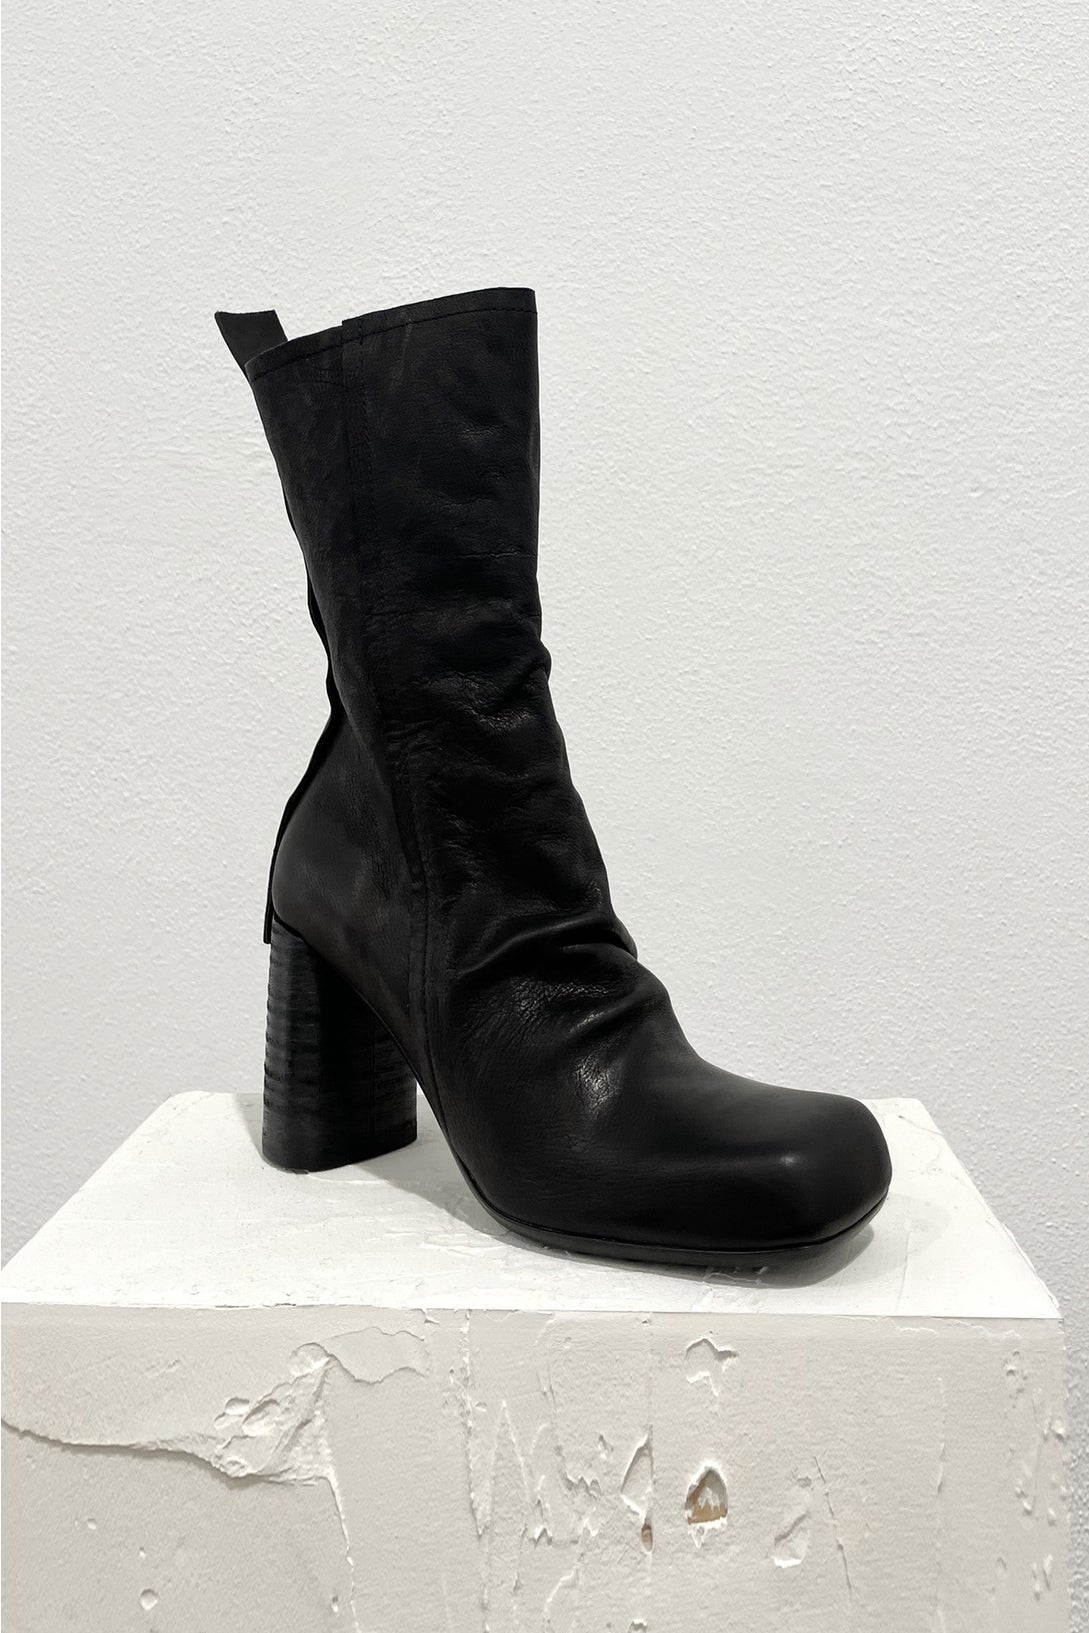 Smooth black leather boots